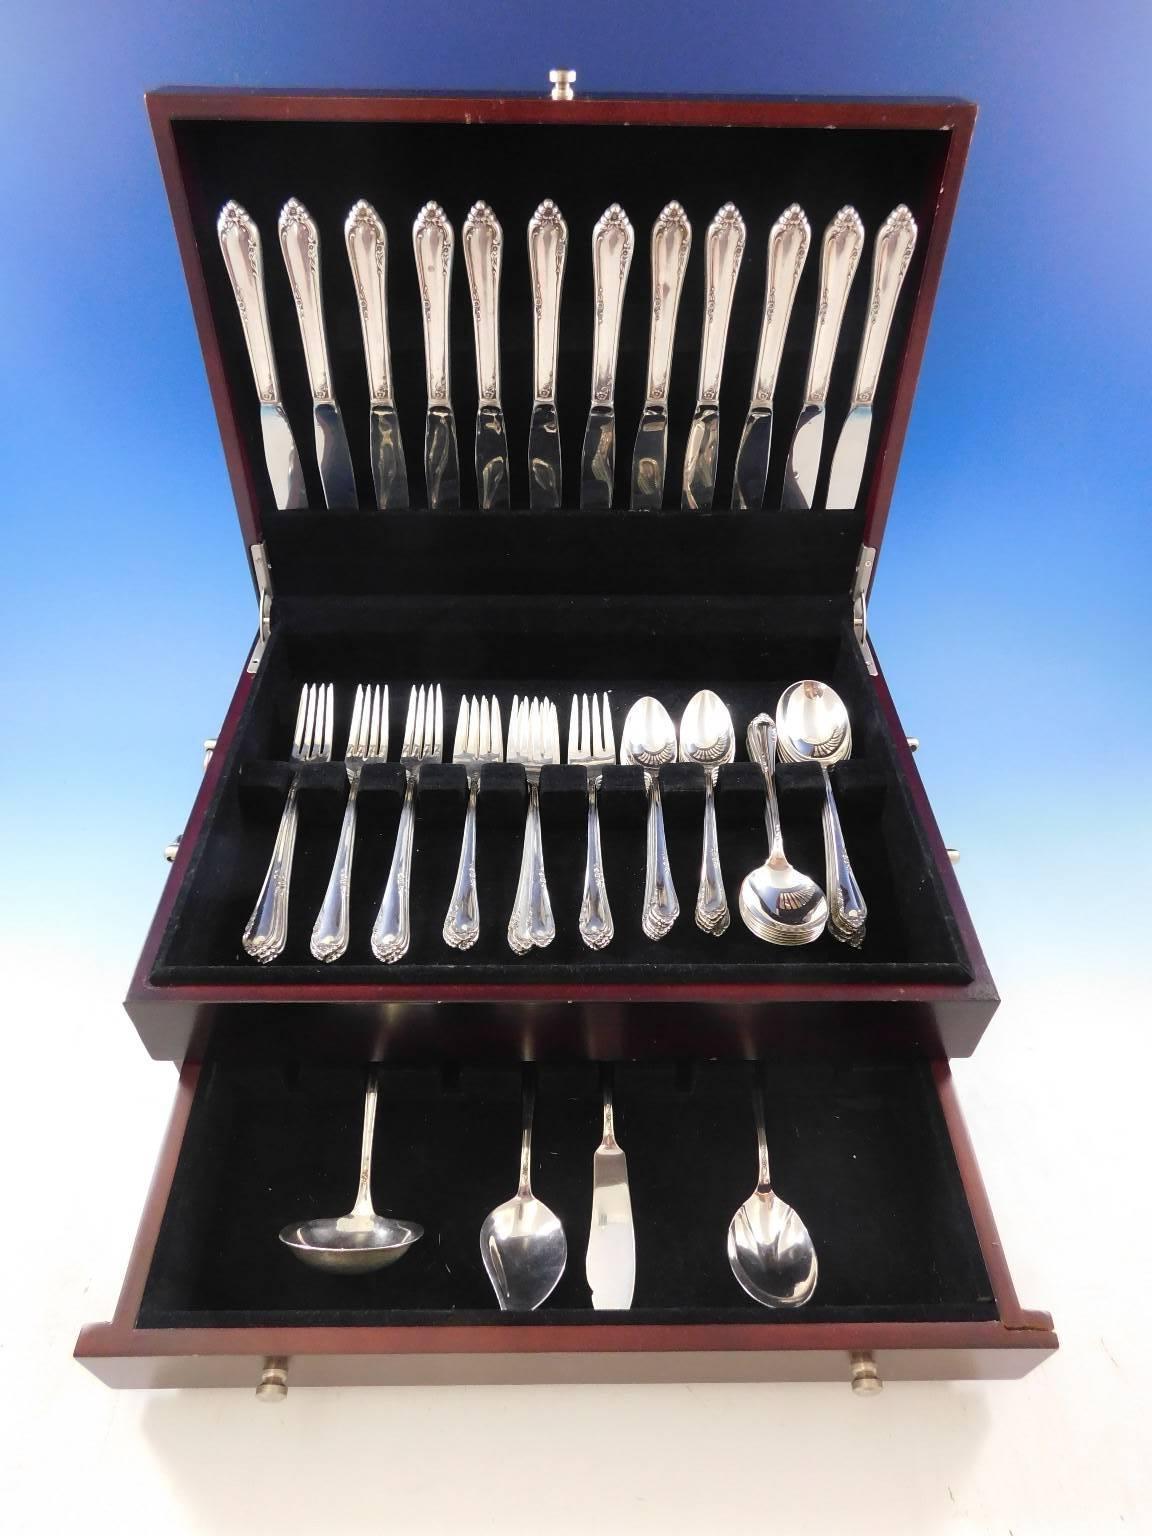 Dancing Flowers by Reed & Barton sterling silver Flatware set, 64 pieces. This set includes:

    12 Knives, 8 7/8